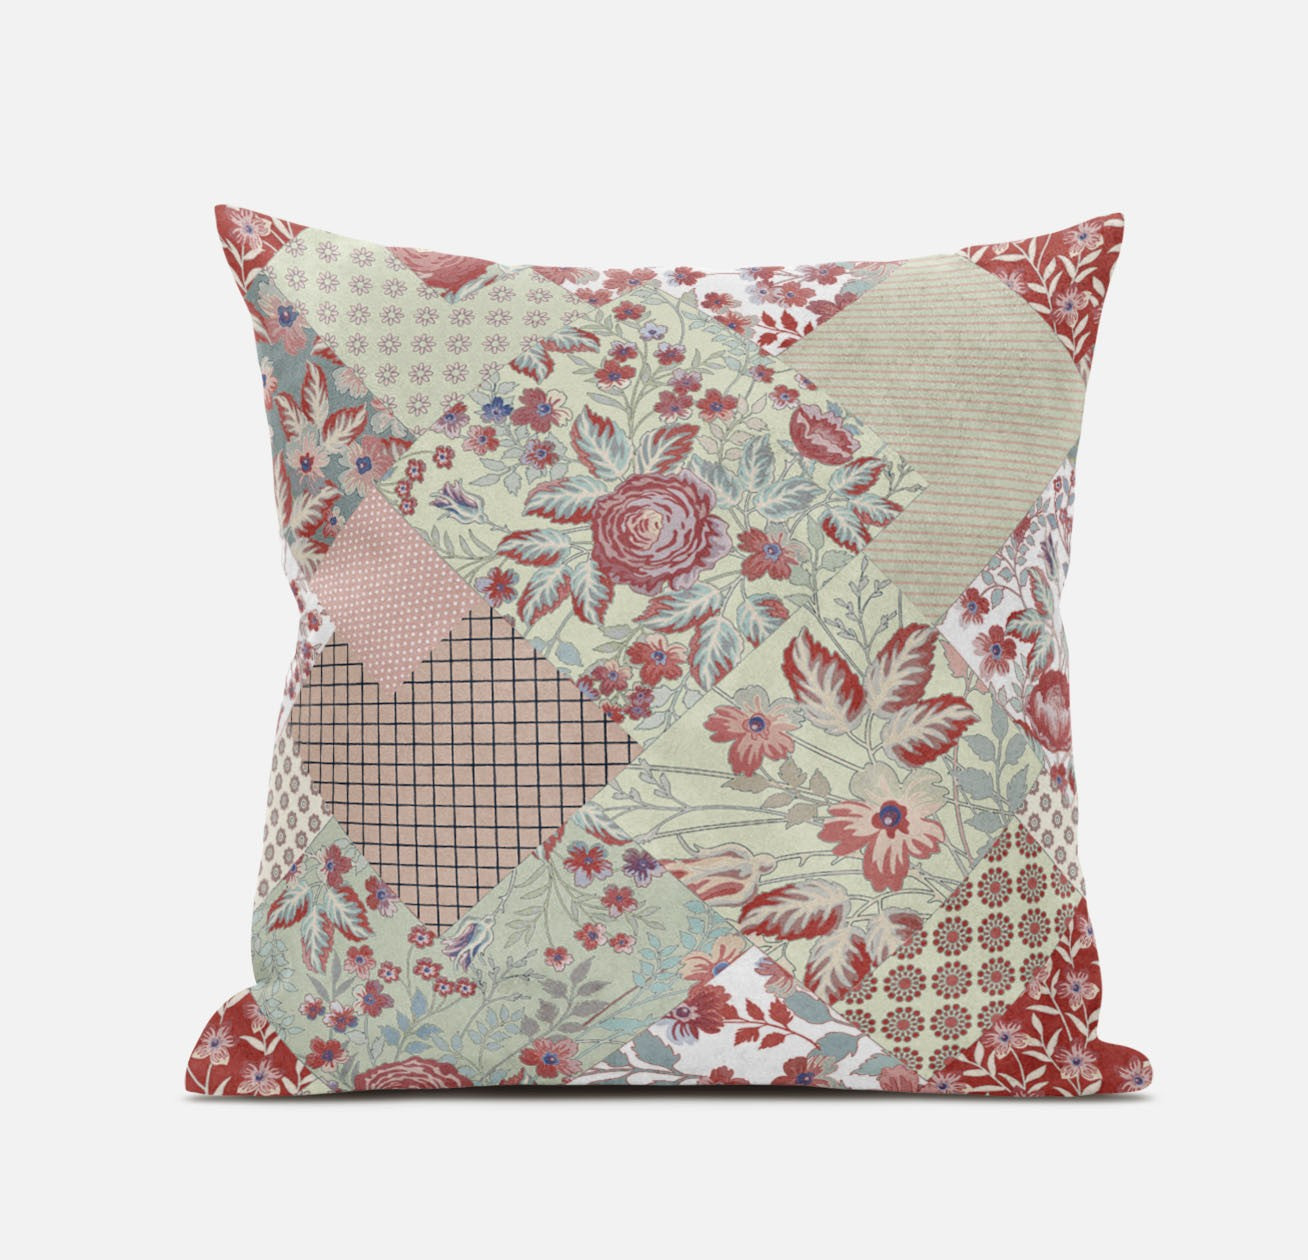 16" Red White Floral Suede Throw Pillow